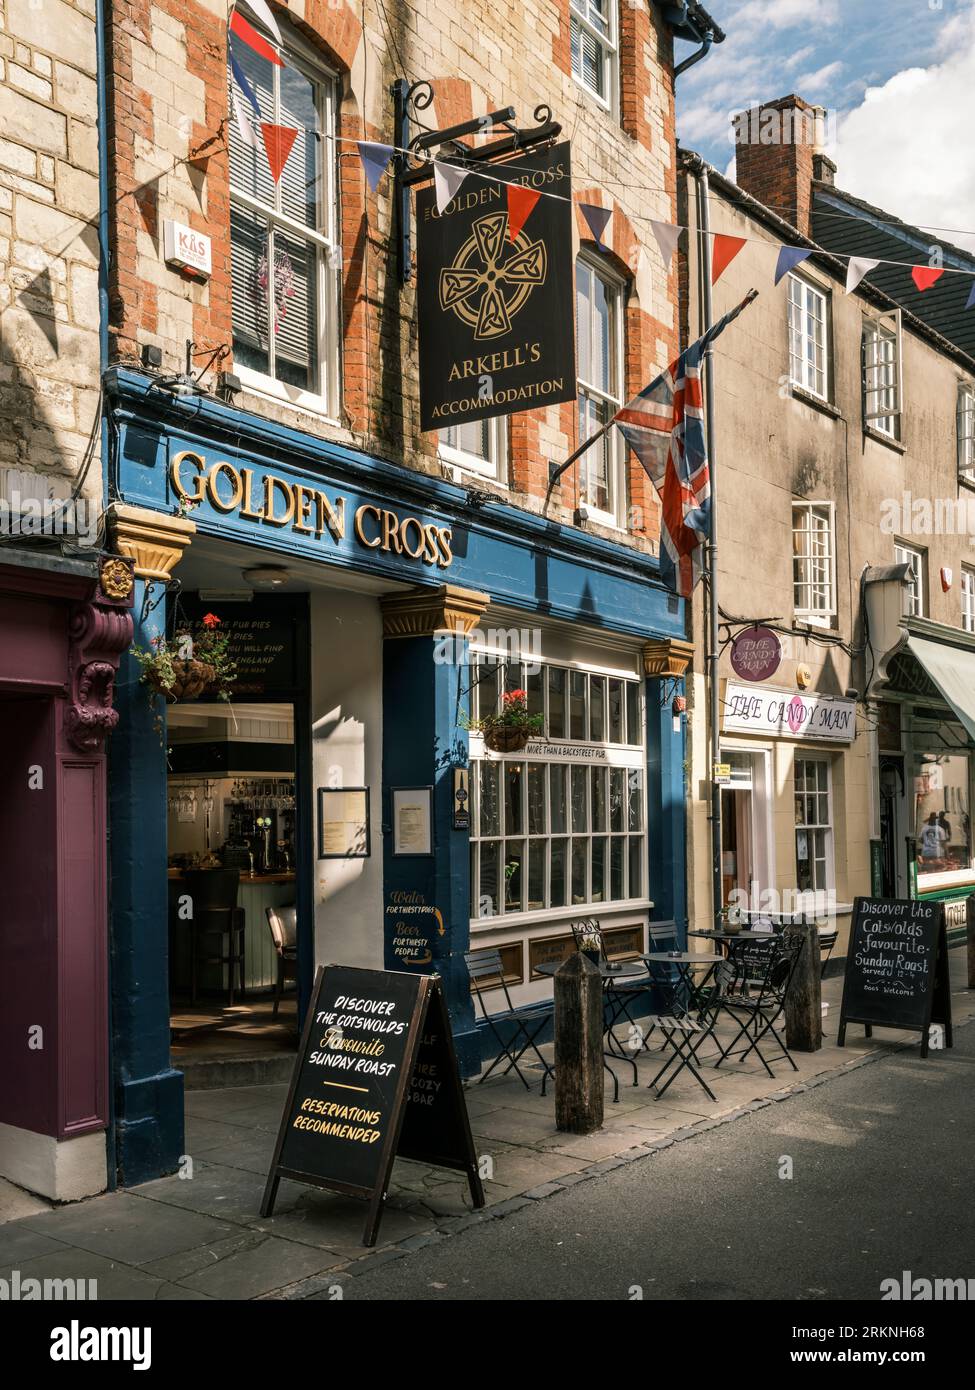 Cirencester, Gloucestershire - England. The Golden Cross public house in Black Jack Street, Cirencester, Gloustershire. Stock Photo